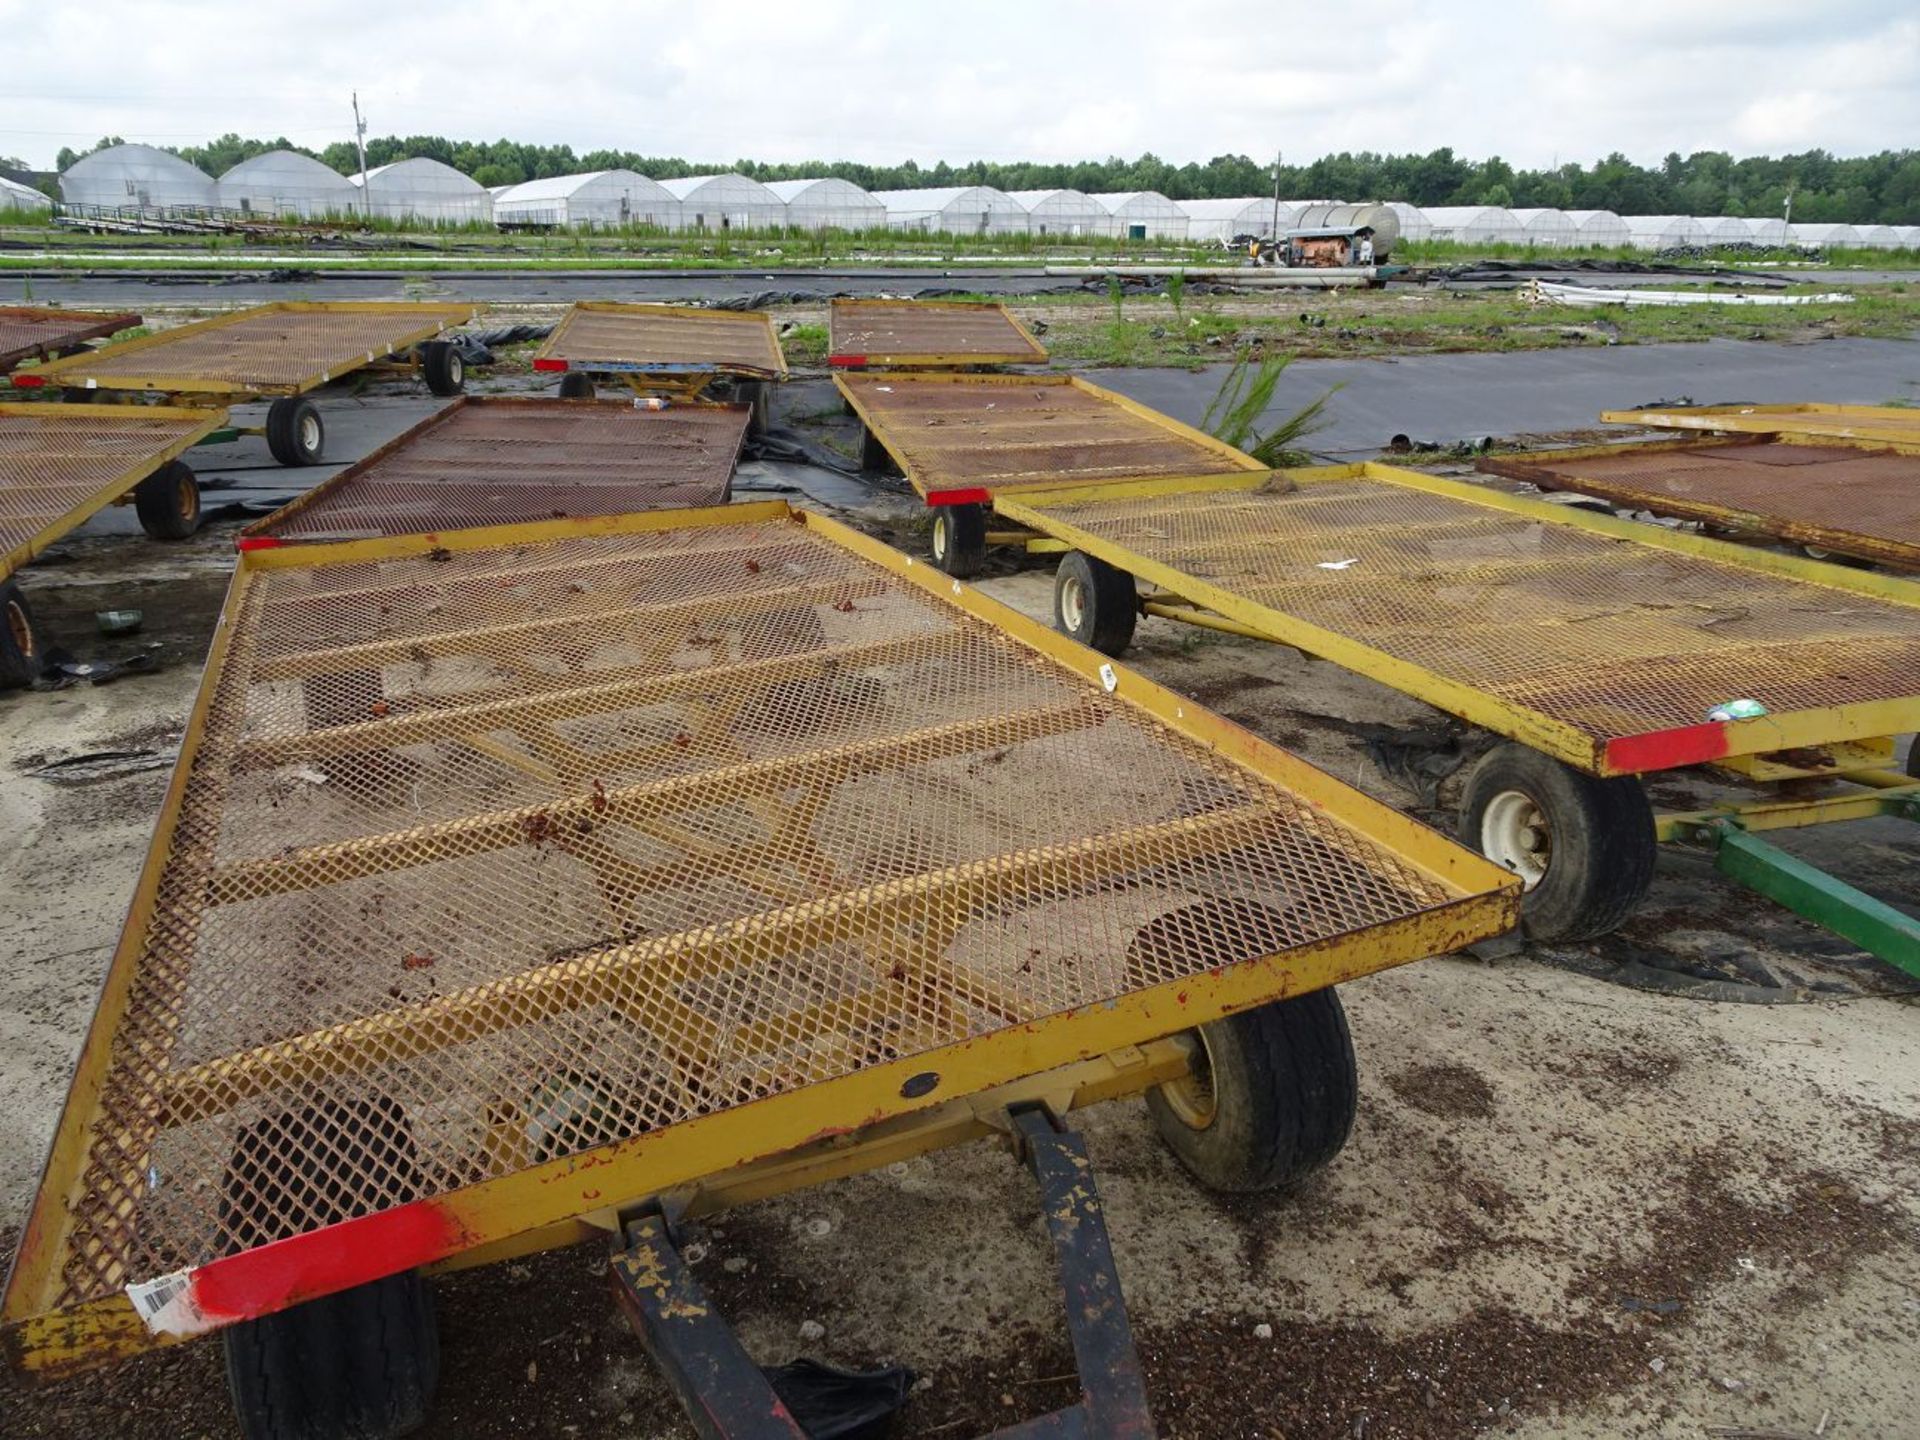 (6) SELF TRACKING TRAILERS, EACH IS PIN STYLE HITCH, EACH TRAILER BED IS 12' LONG x 6' WIDE (FOR